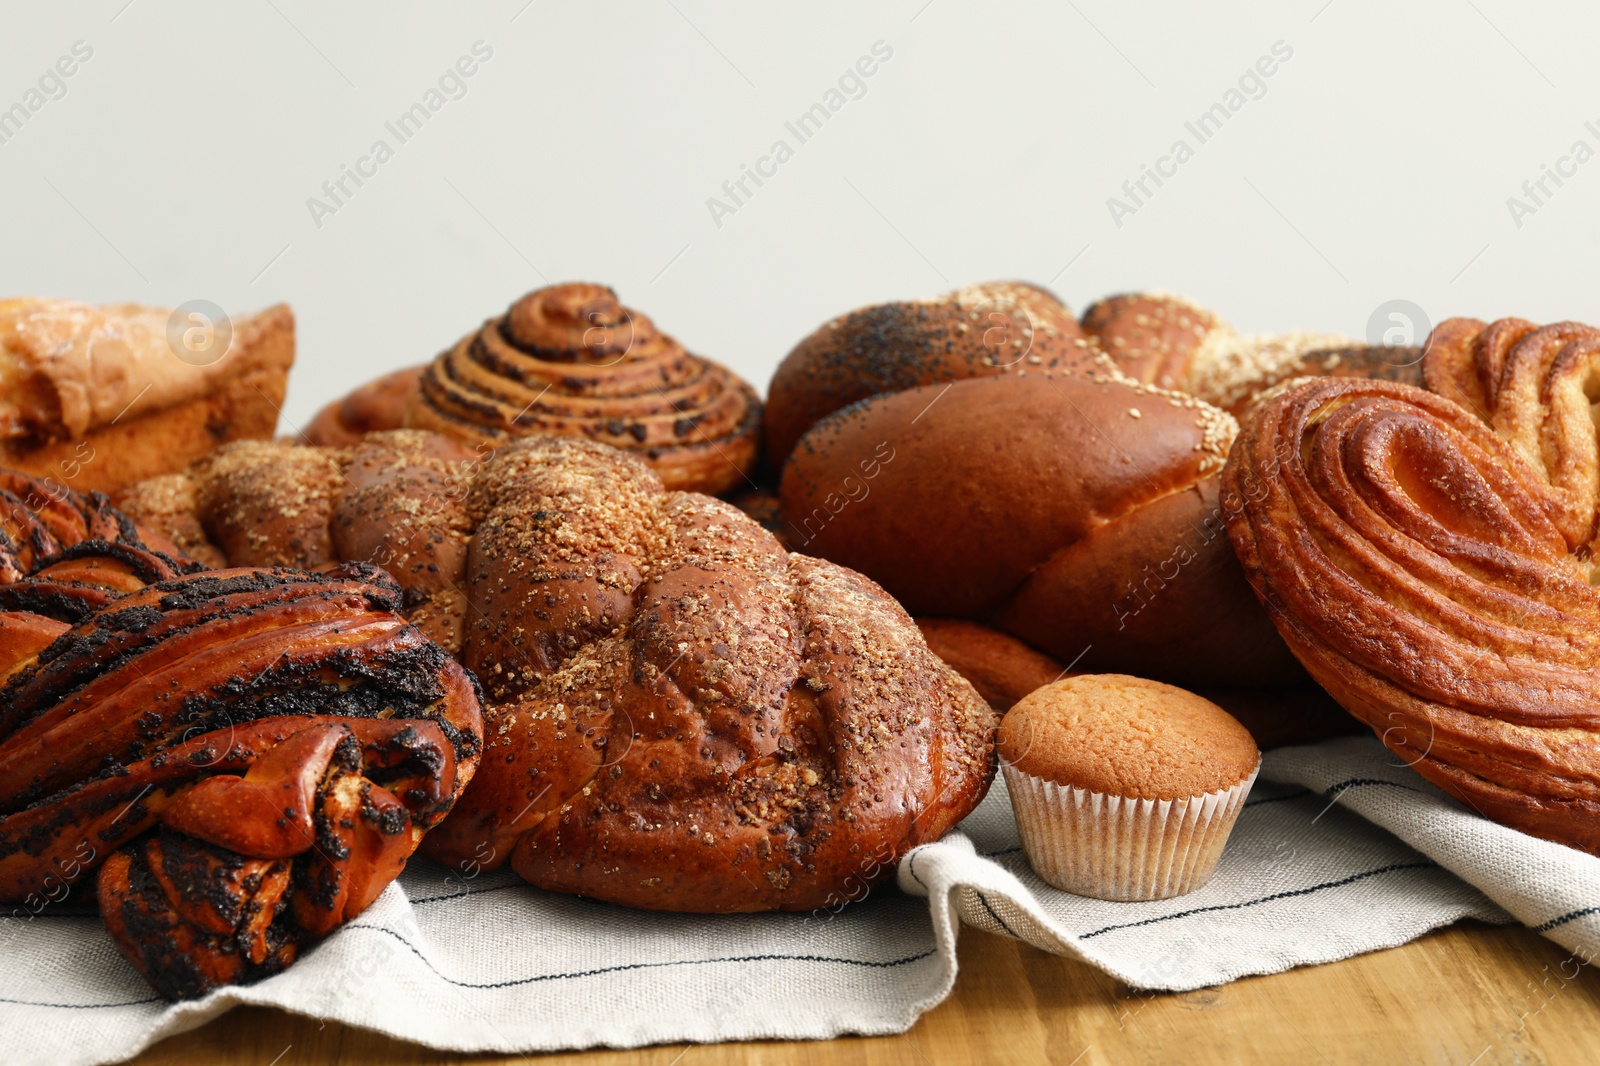 Photo of Different tasty freshly baked pastries on table